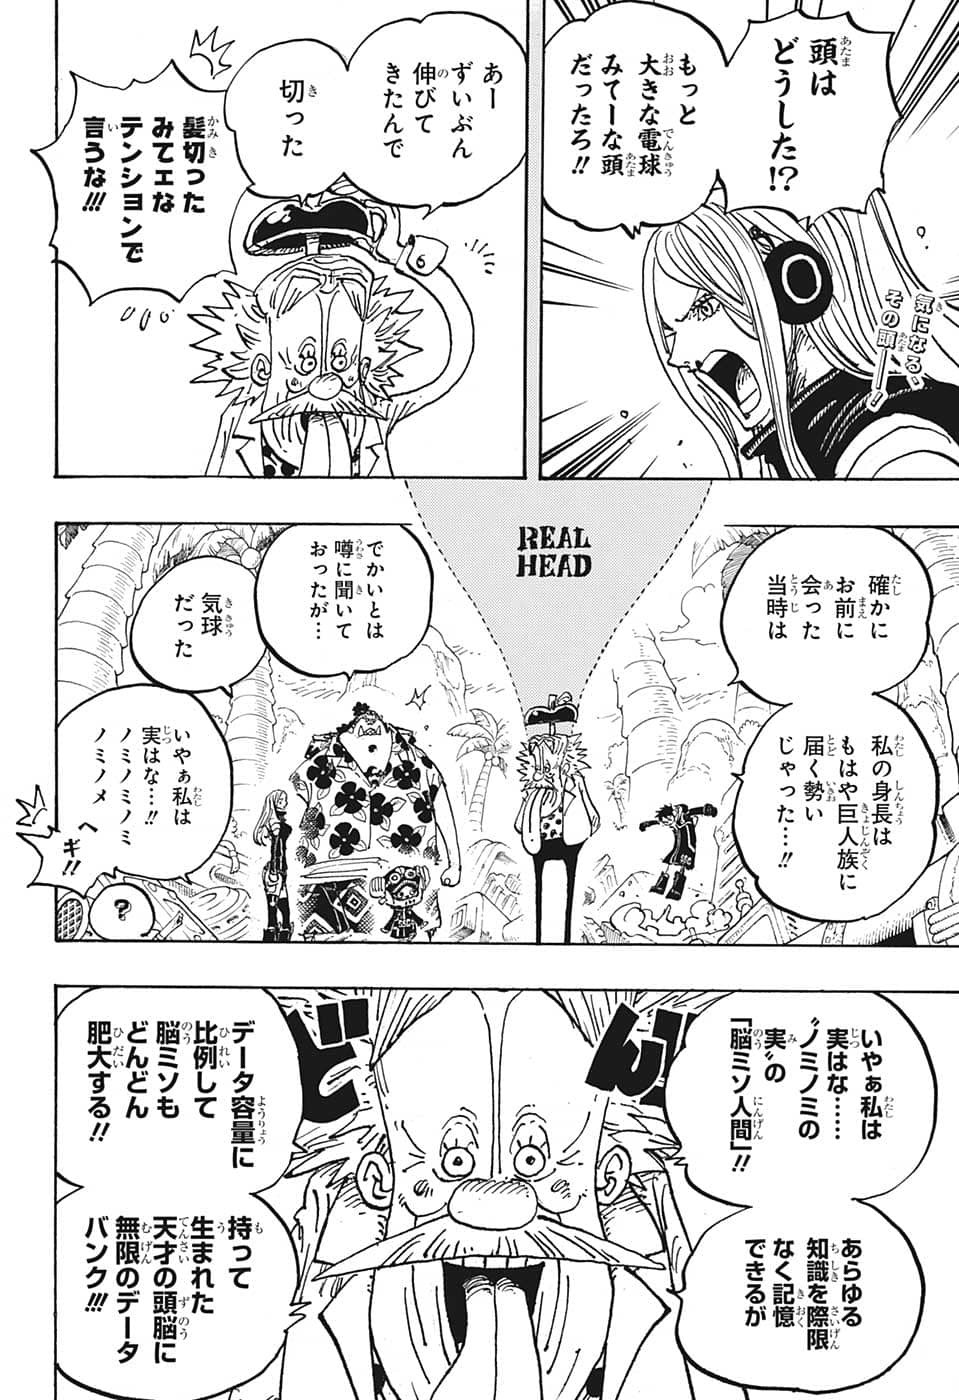 One Piece - Chapter 1067 - Page 2